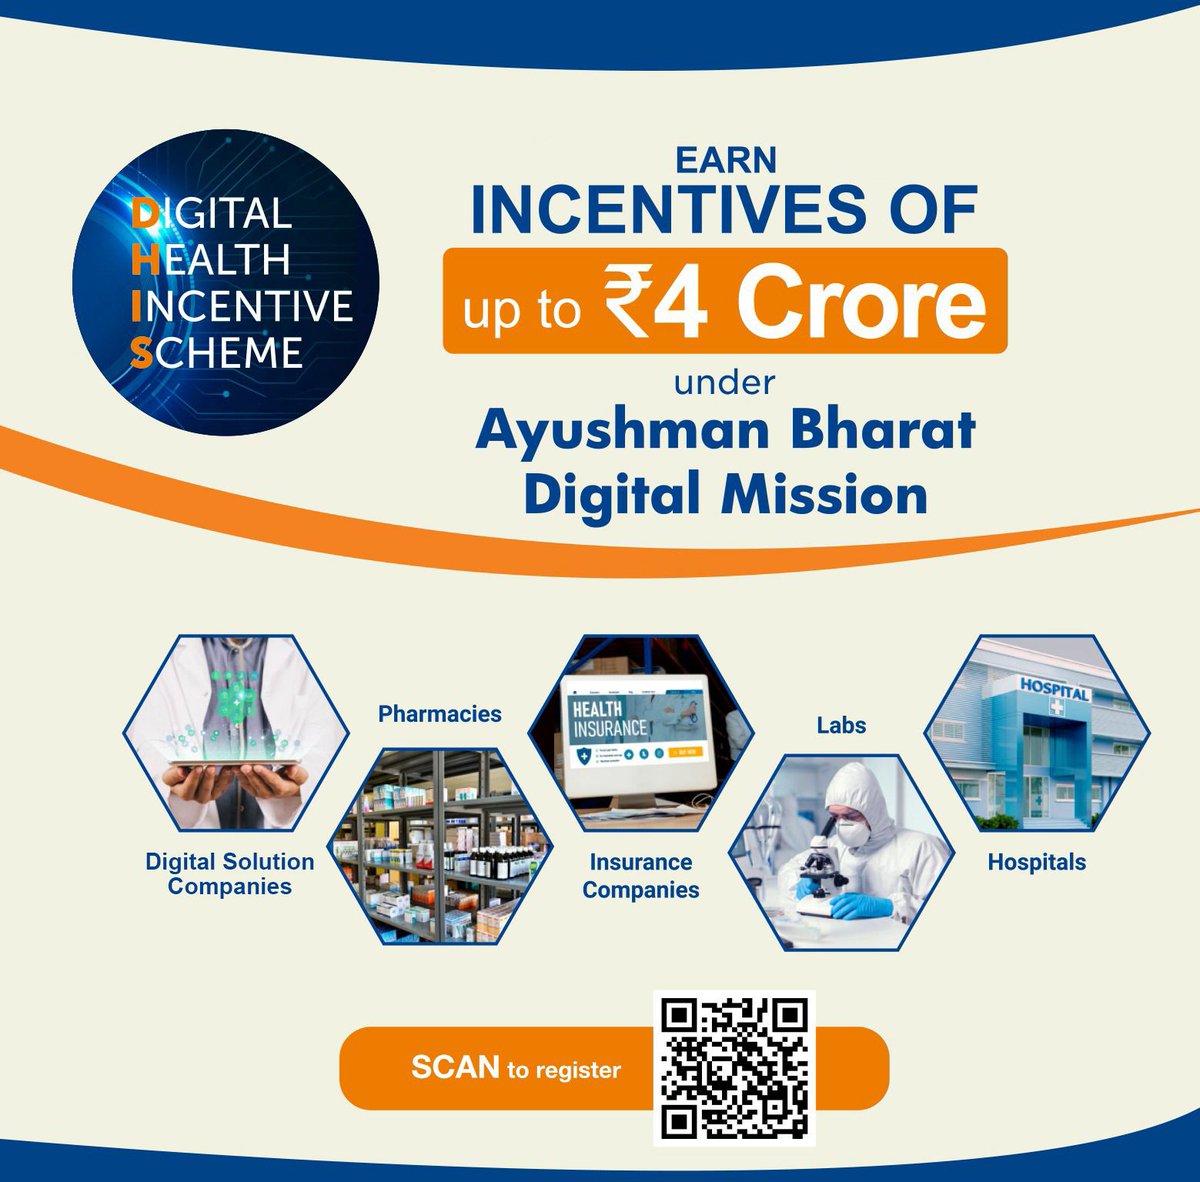 Adopt ABDM-enabled digital solutions & earn incentives of up to Rs 4 Crore! 2967 health facilities including Clinics,Nursing Homes, Hospitals, Labs, Radiology/Diagnostics Centers, Pharmacies & Digital Solution Companies have already registered! Know More abdm.gov.in/DHIS